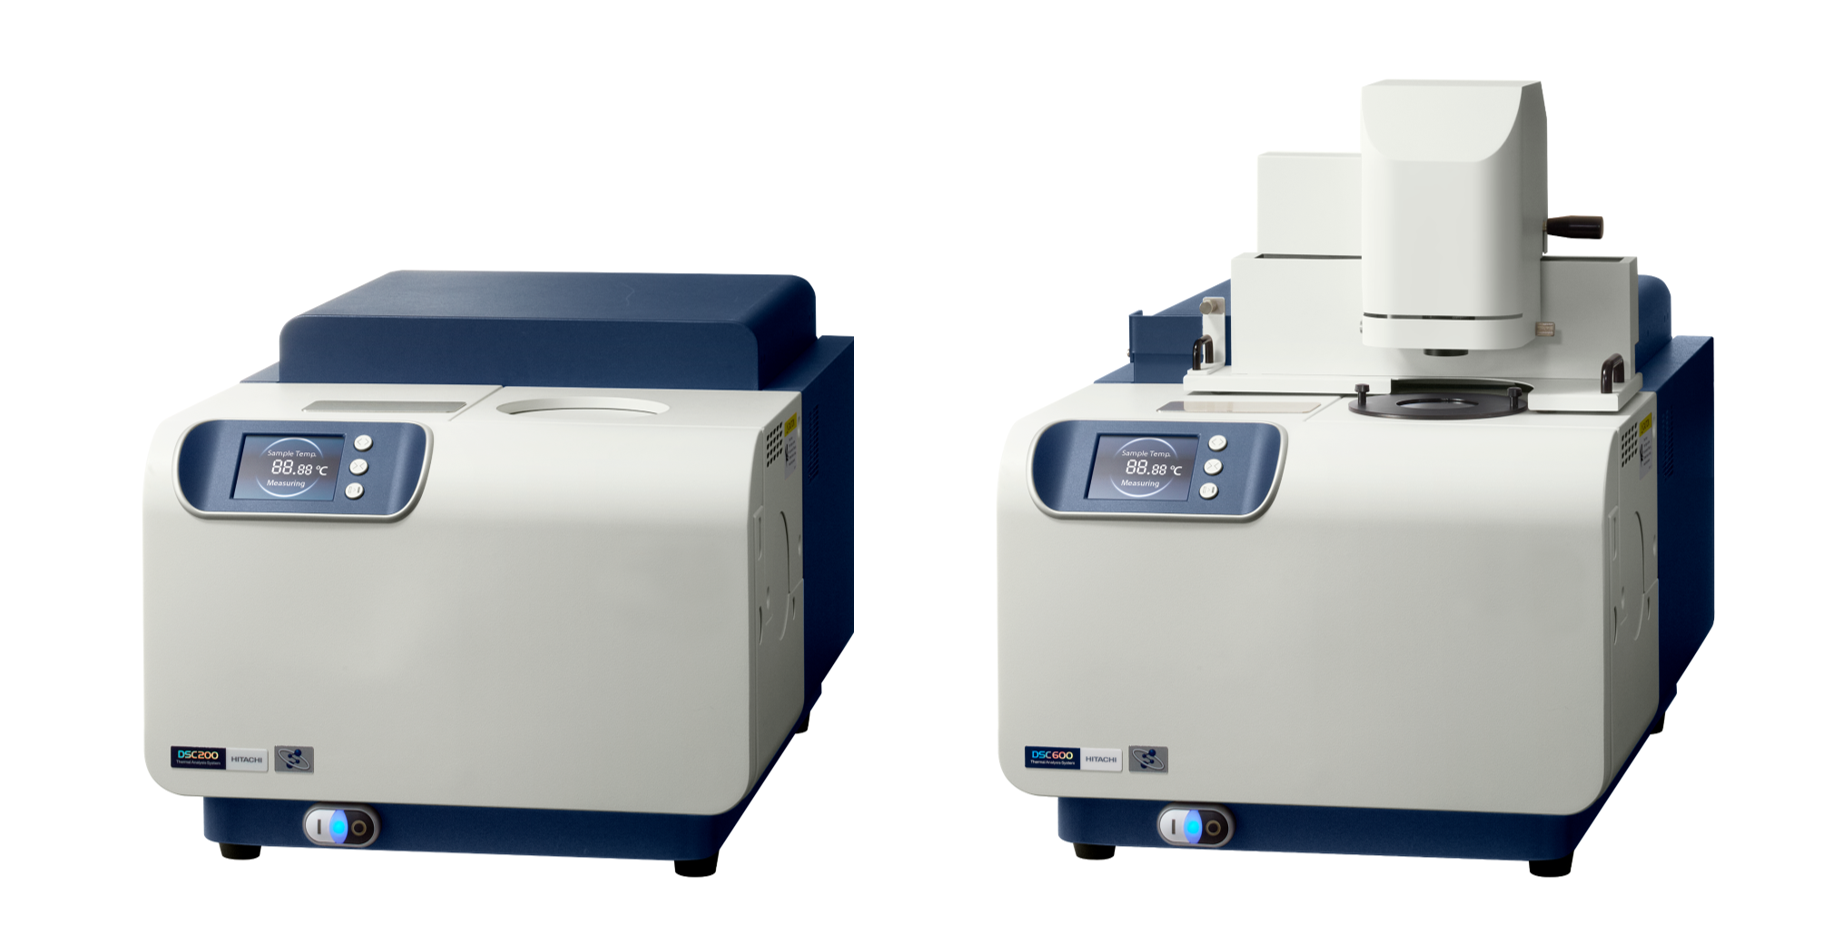 Hitachi has launched two new differential scanning calorimeters (DSCs) suitable for materials development and product quality control.